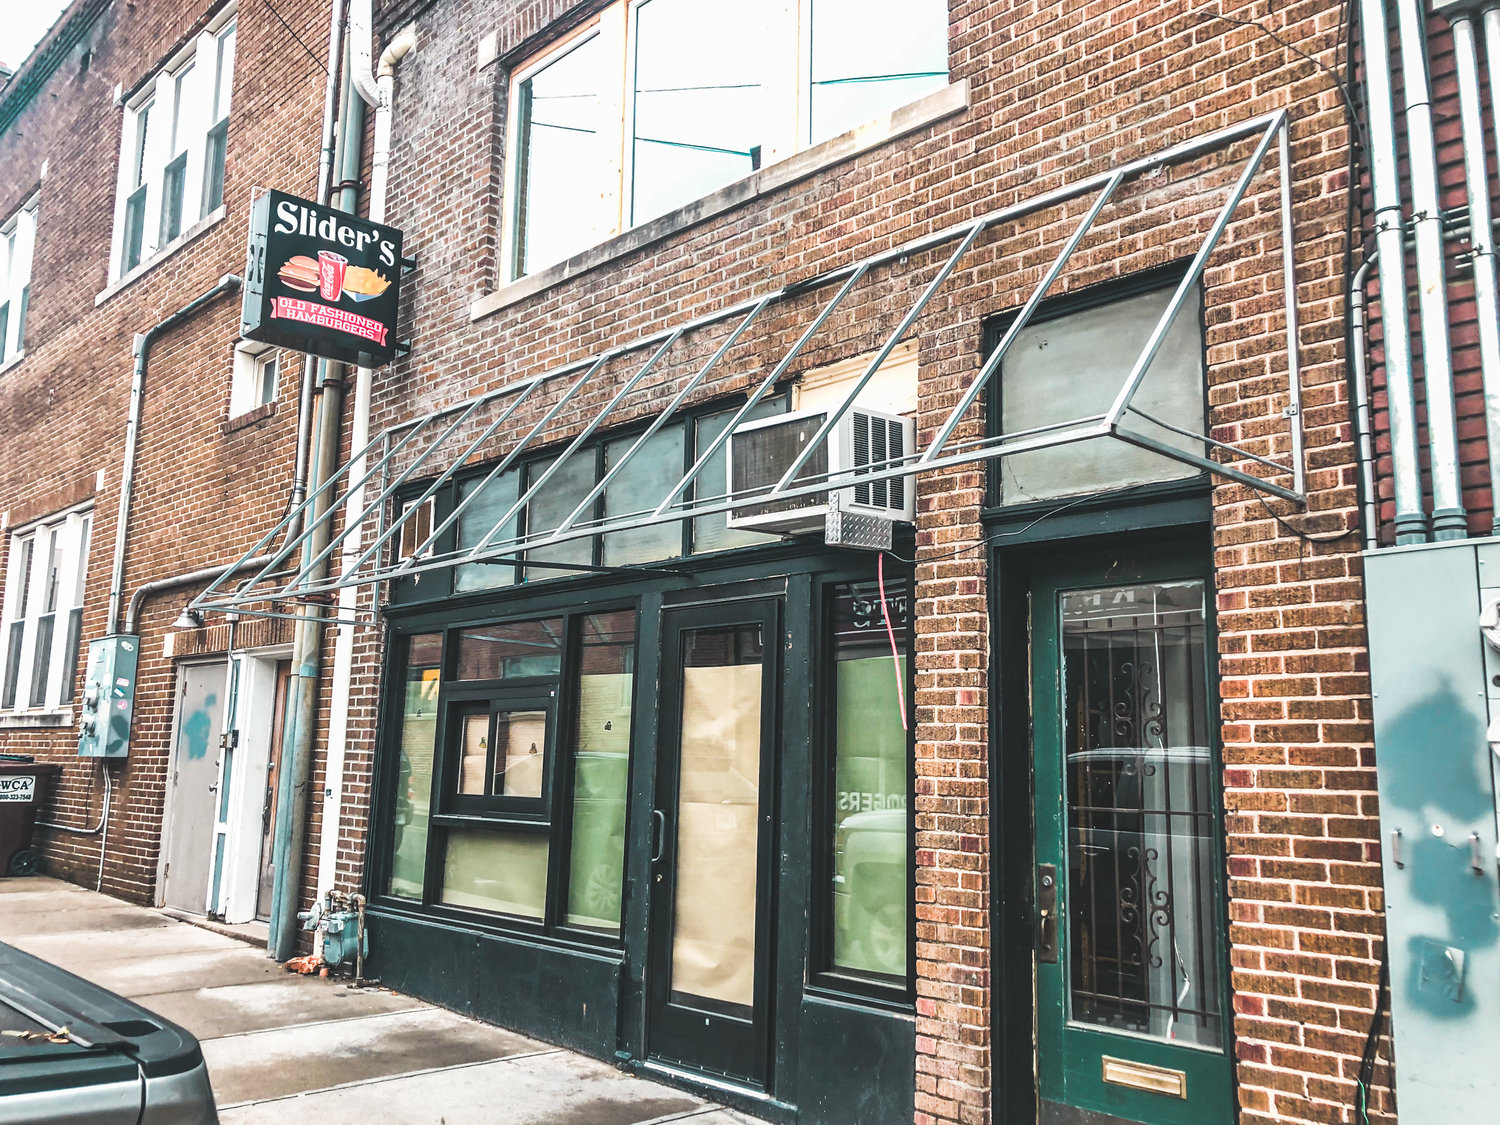 Secret Sandwich Shop plans to reopen later this month at a downtown storefront previously occupied by Slider’s.